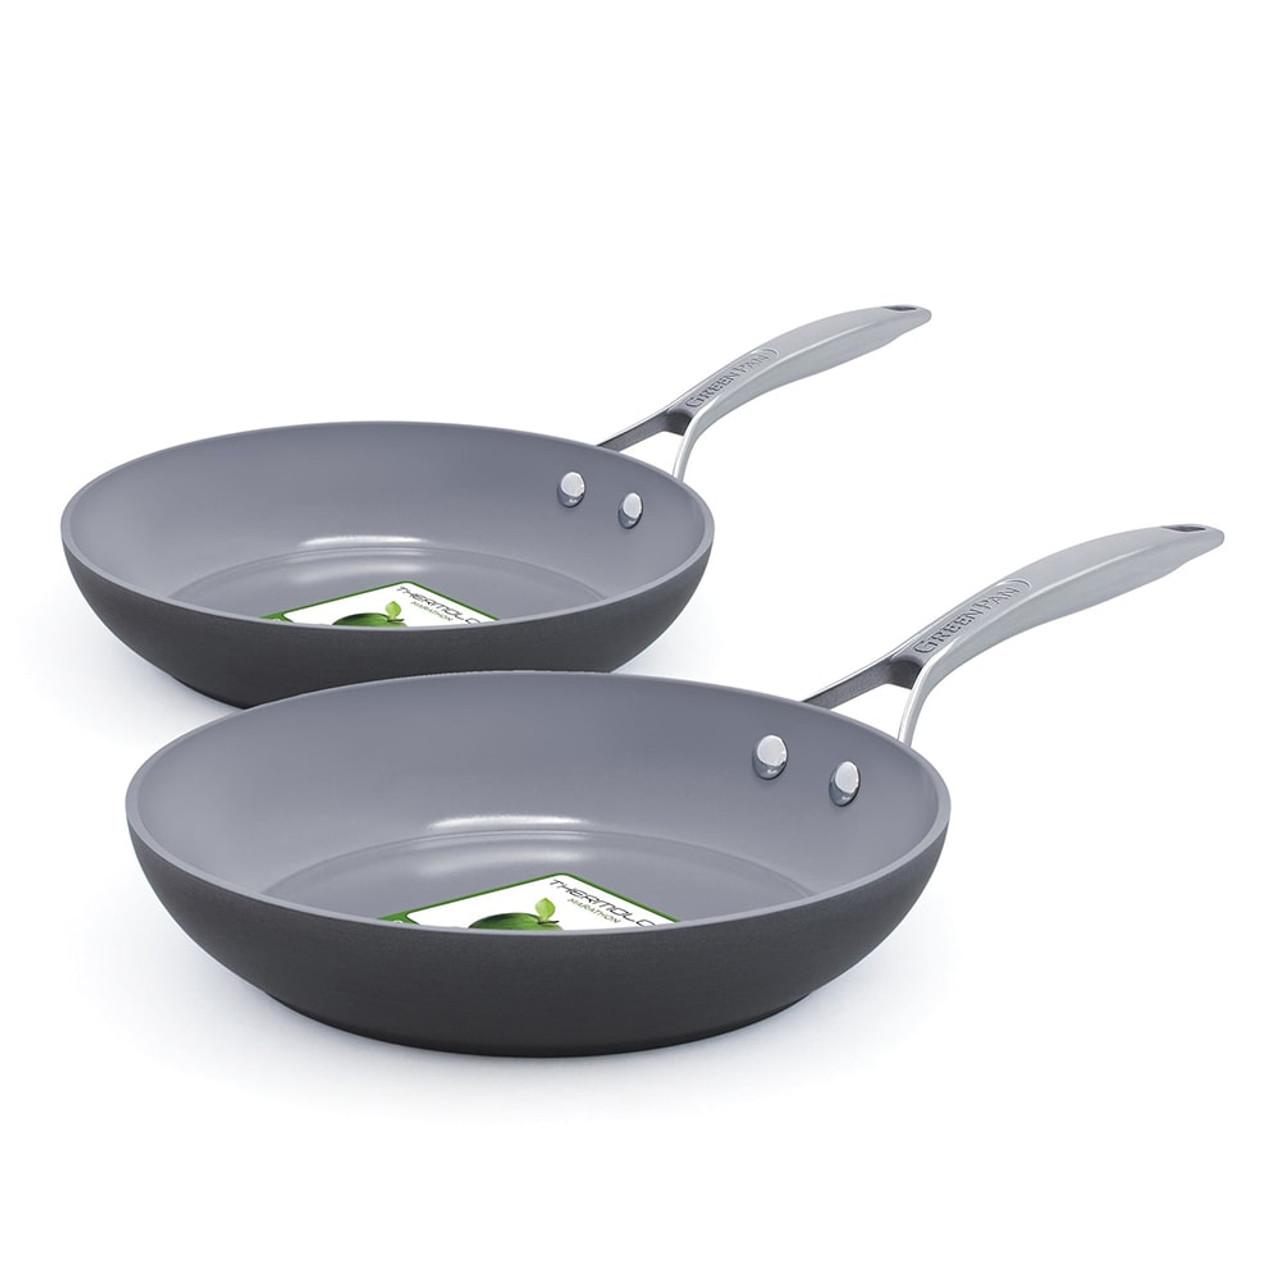 https://cdn11.bigcommerce.com/s-hccytny0od/images/stencil/1280x1280/products/2896/10201/greenpan-paris-pro-fry-pan-set-8-10in__46509.1589126224.jpg?c=2?imbypass=on